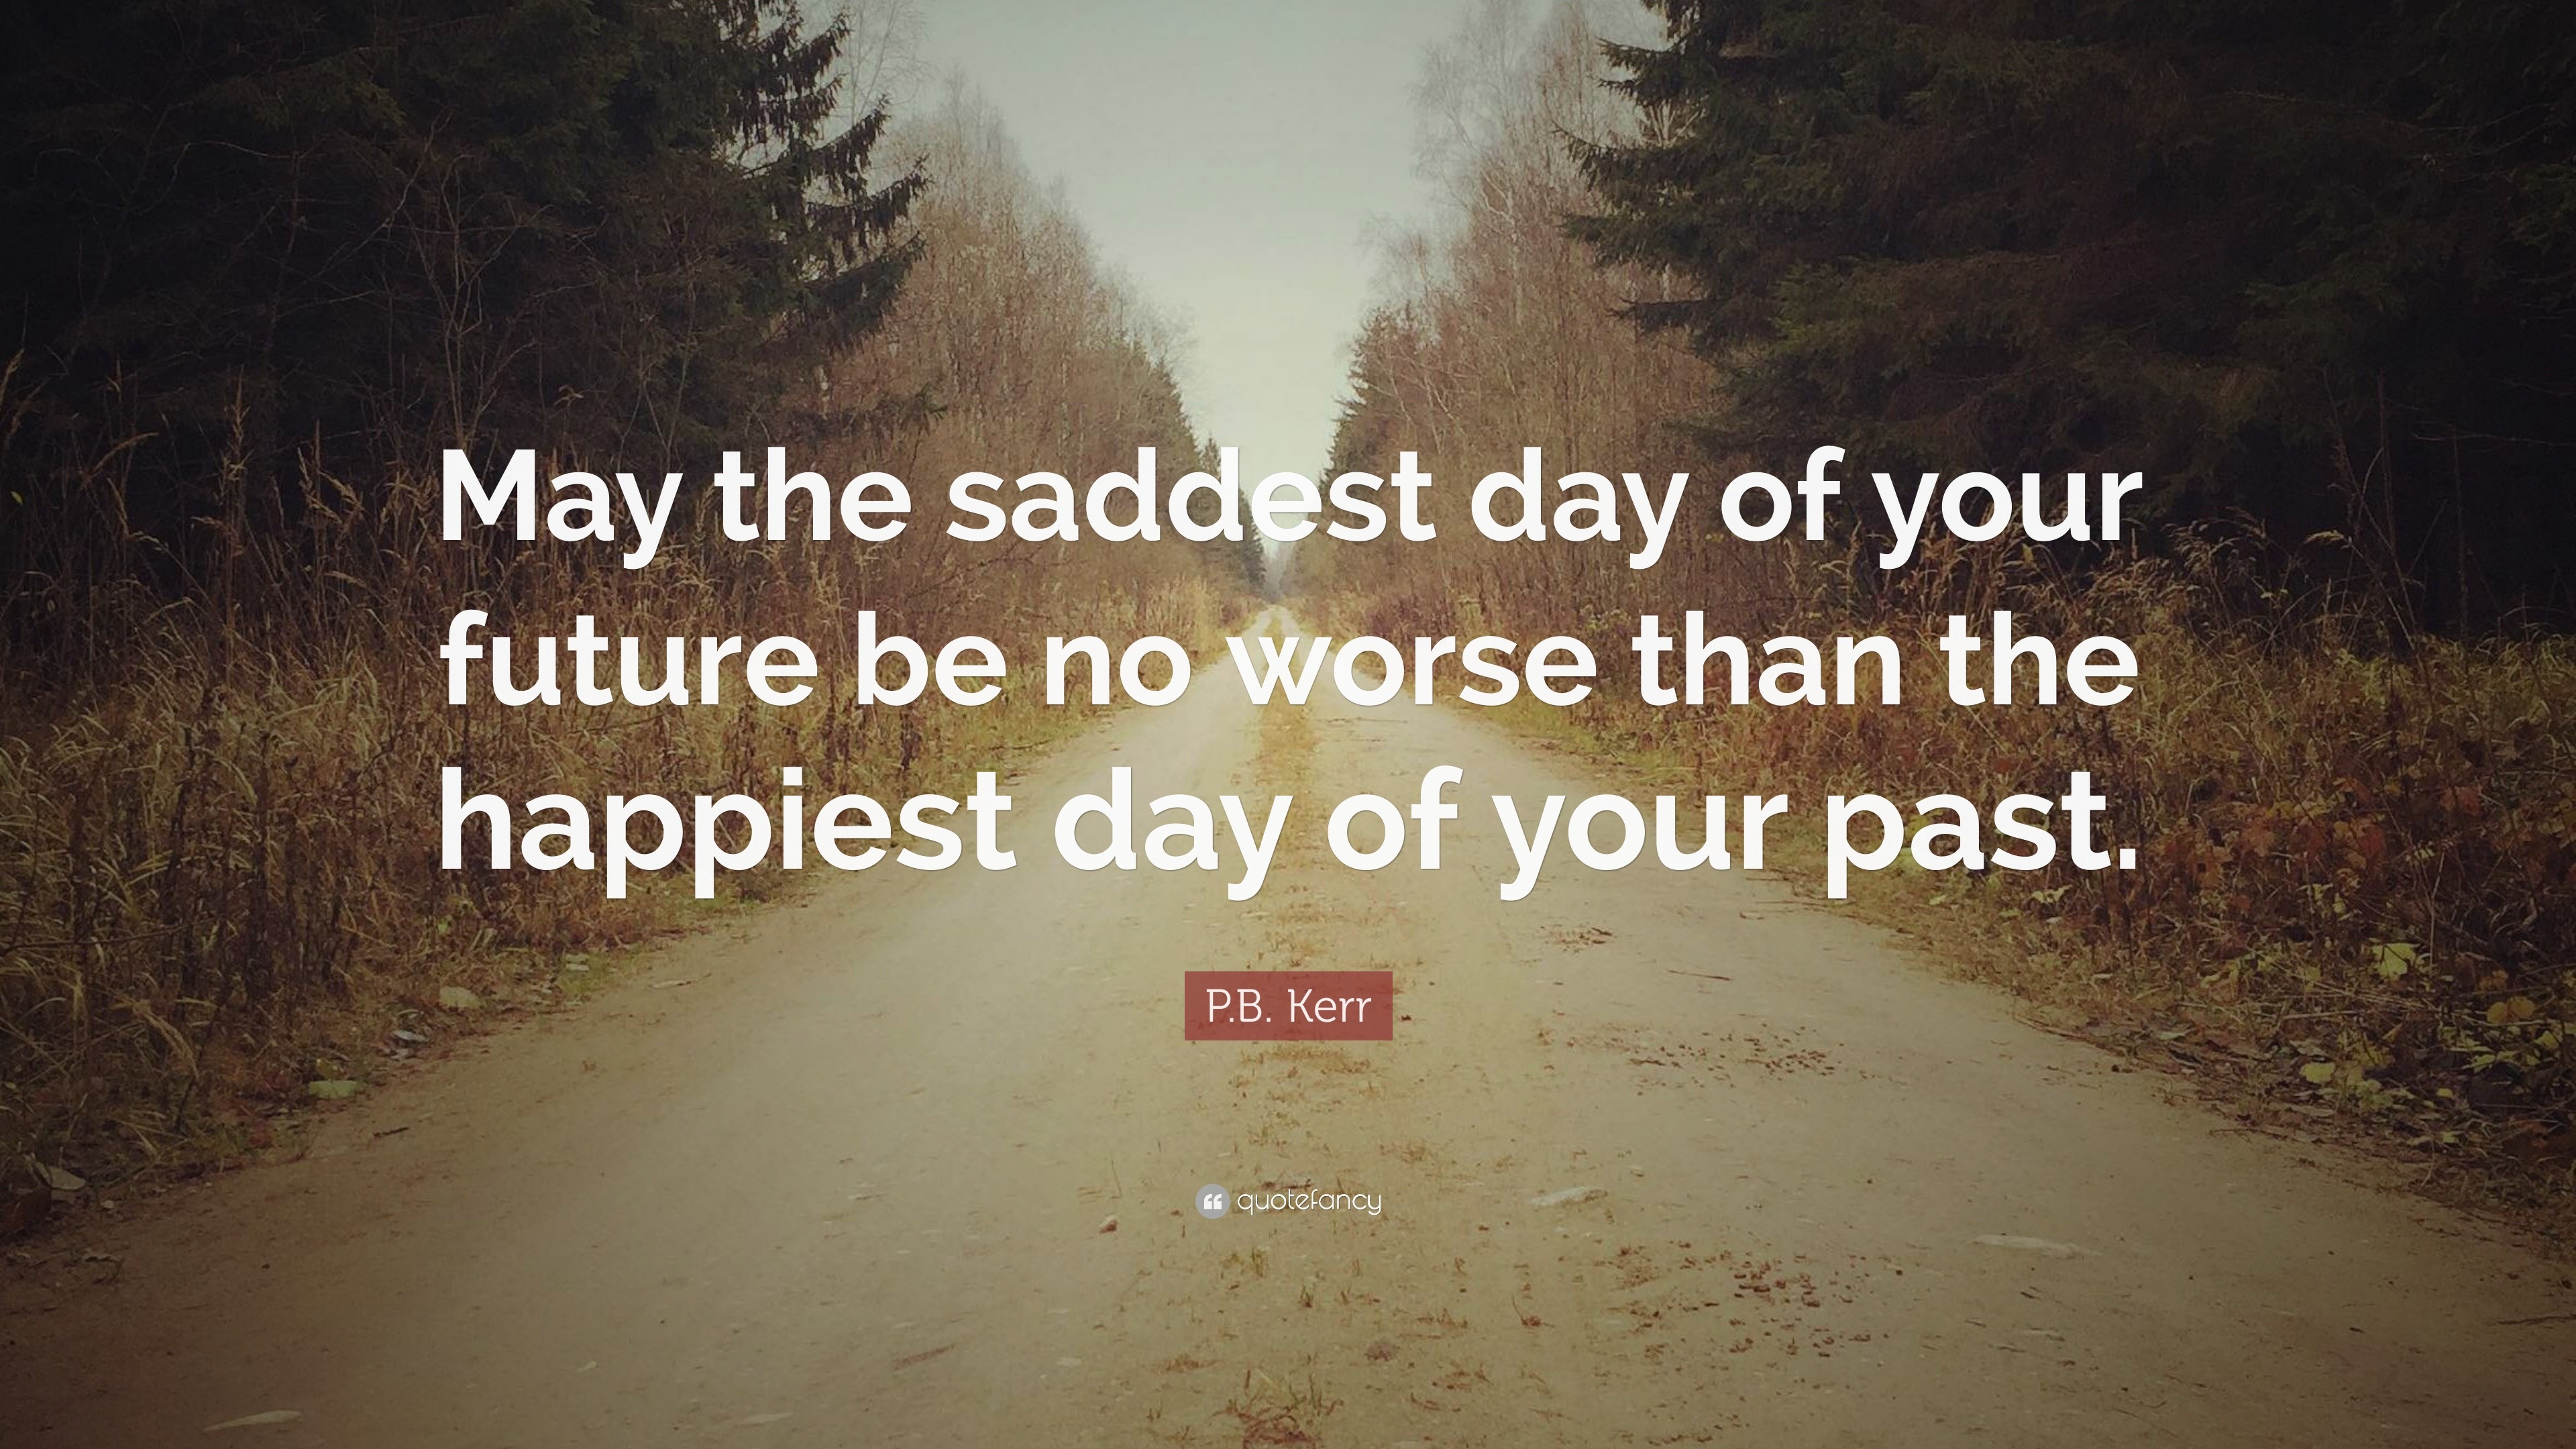 P.B. Kerr Quote “May the saddest day of your future be no worse than